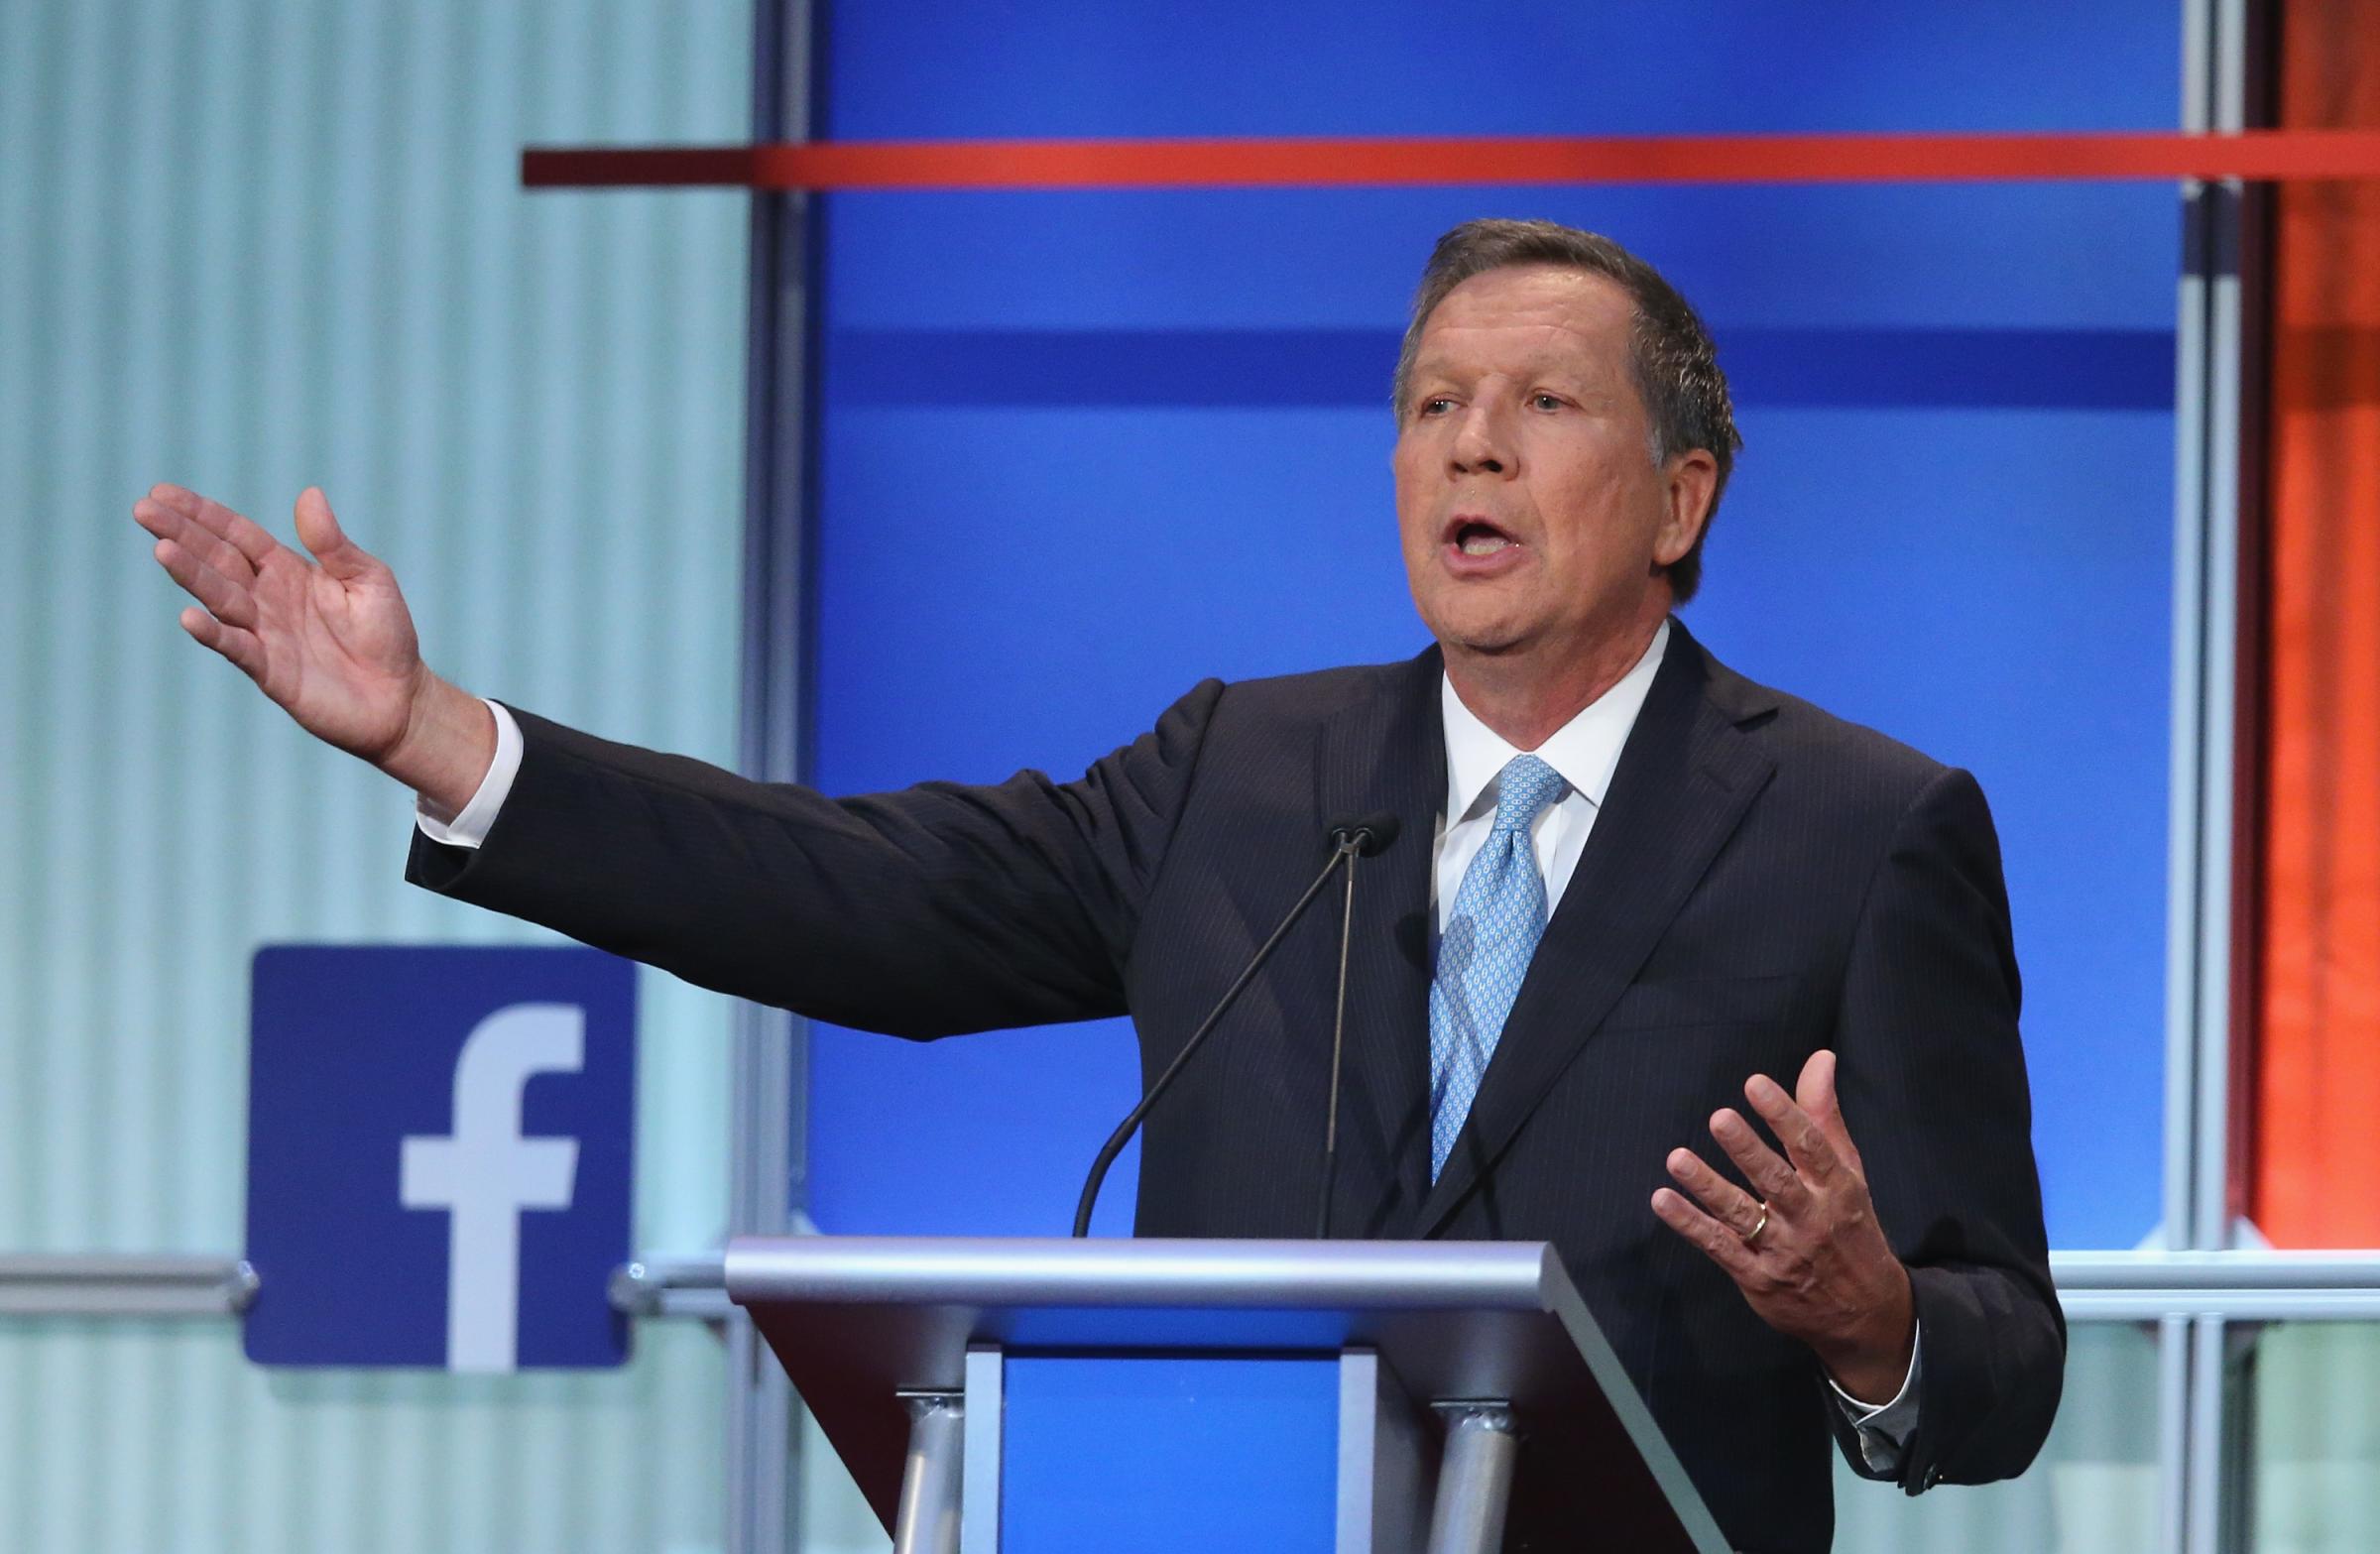 Republican presidential candidate Ohio Gov. John Kasich fields a question during the first Republican presidential debate hosted by Fox News and Facebook at the Quicken Loans Arena in Cleveland, Ohio, on Aug. 6, 2015.